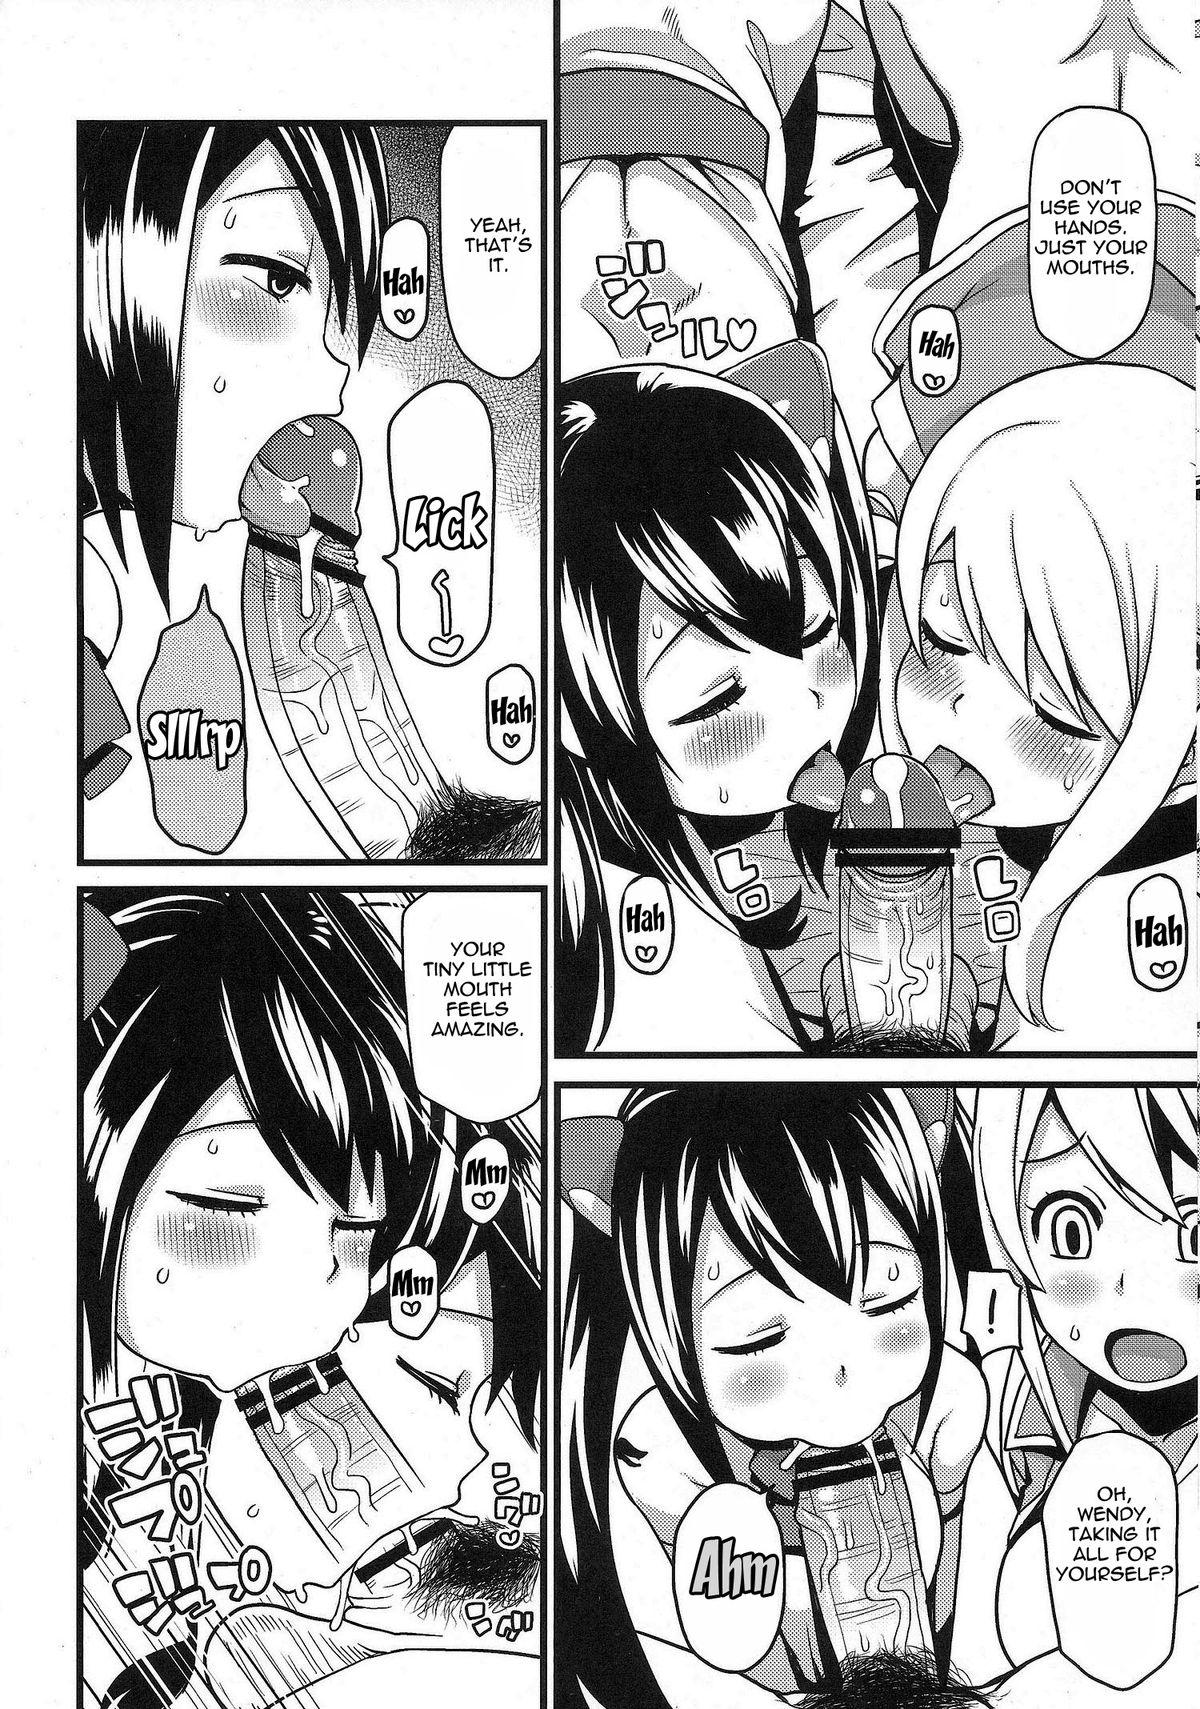 Wet Cunt Chichikko Bitch 2 - Fairy tail Doublepenetration - Page 8